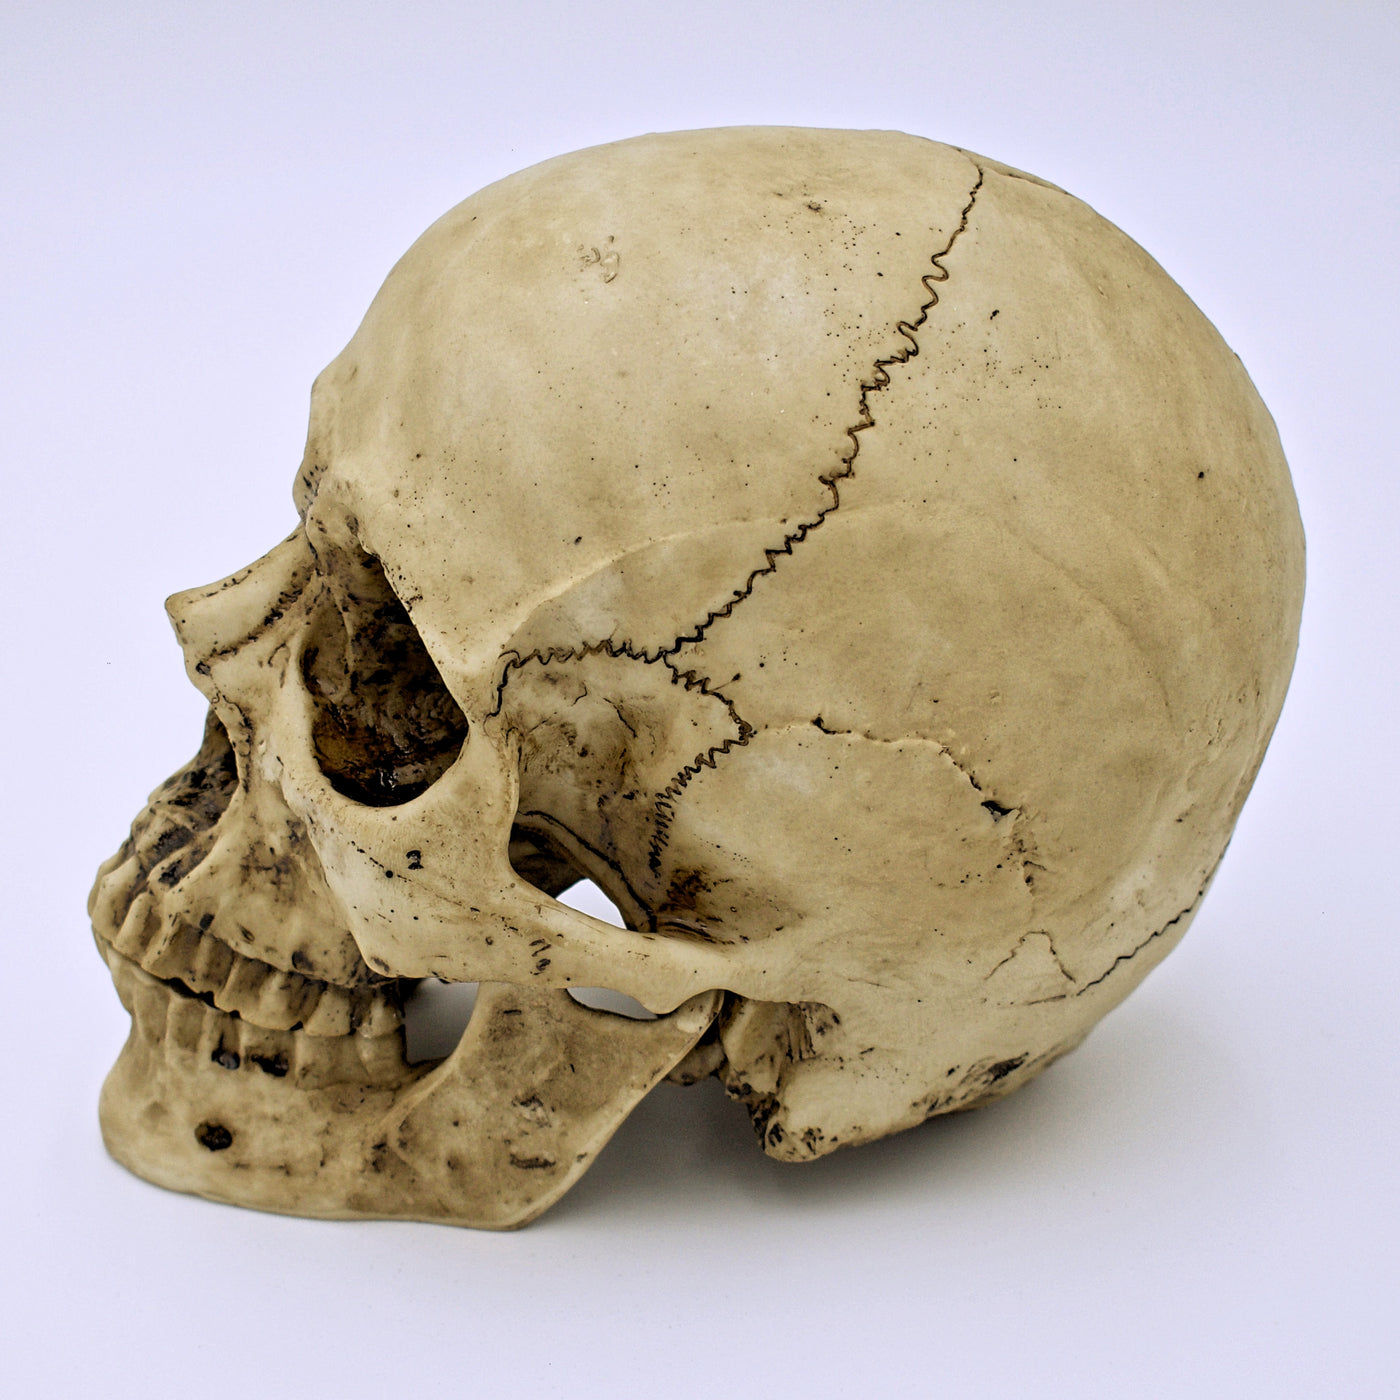 Natural Skull Design Sculpture w/ Removable Jaw - The Cranio Collections